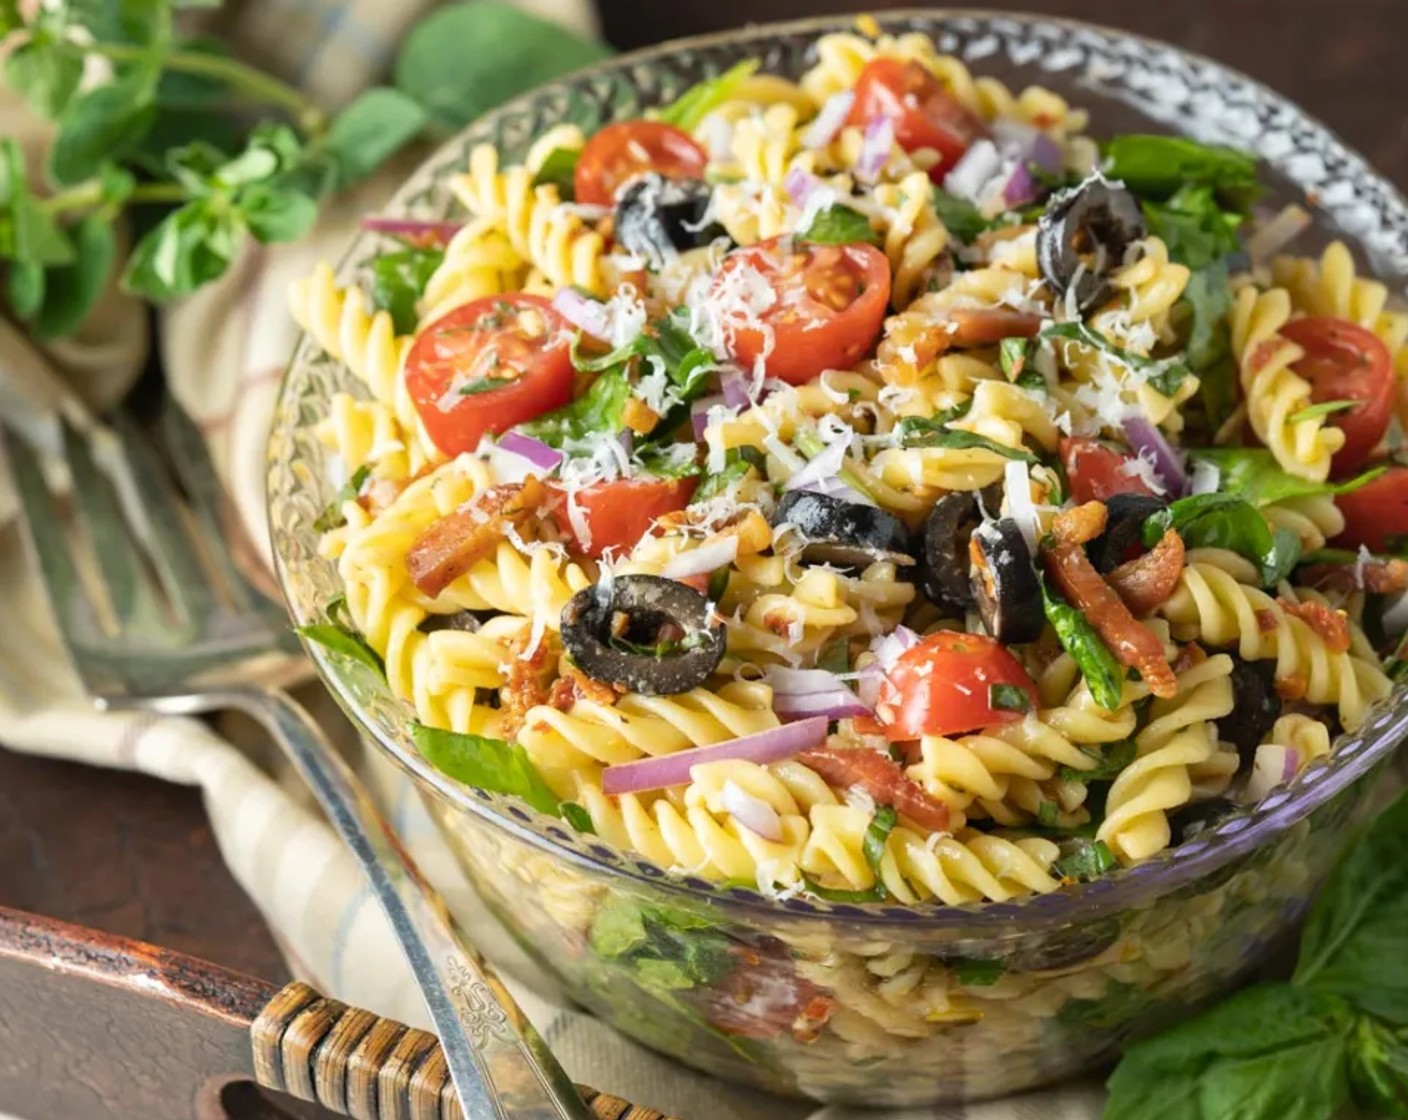 step 4 Toss together pasta, pancetta, Fresh Baby Spinach (2 cups), Cherry Tomato (1 cup), Black Olives (1/2 cup), Red Onion (1/3 cup), Parmesan Cheese (1/3 cup), and dressing until combined. Adjust seasoning and serve.